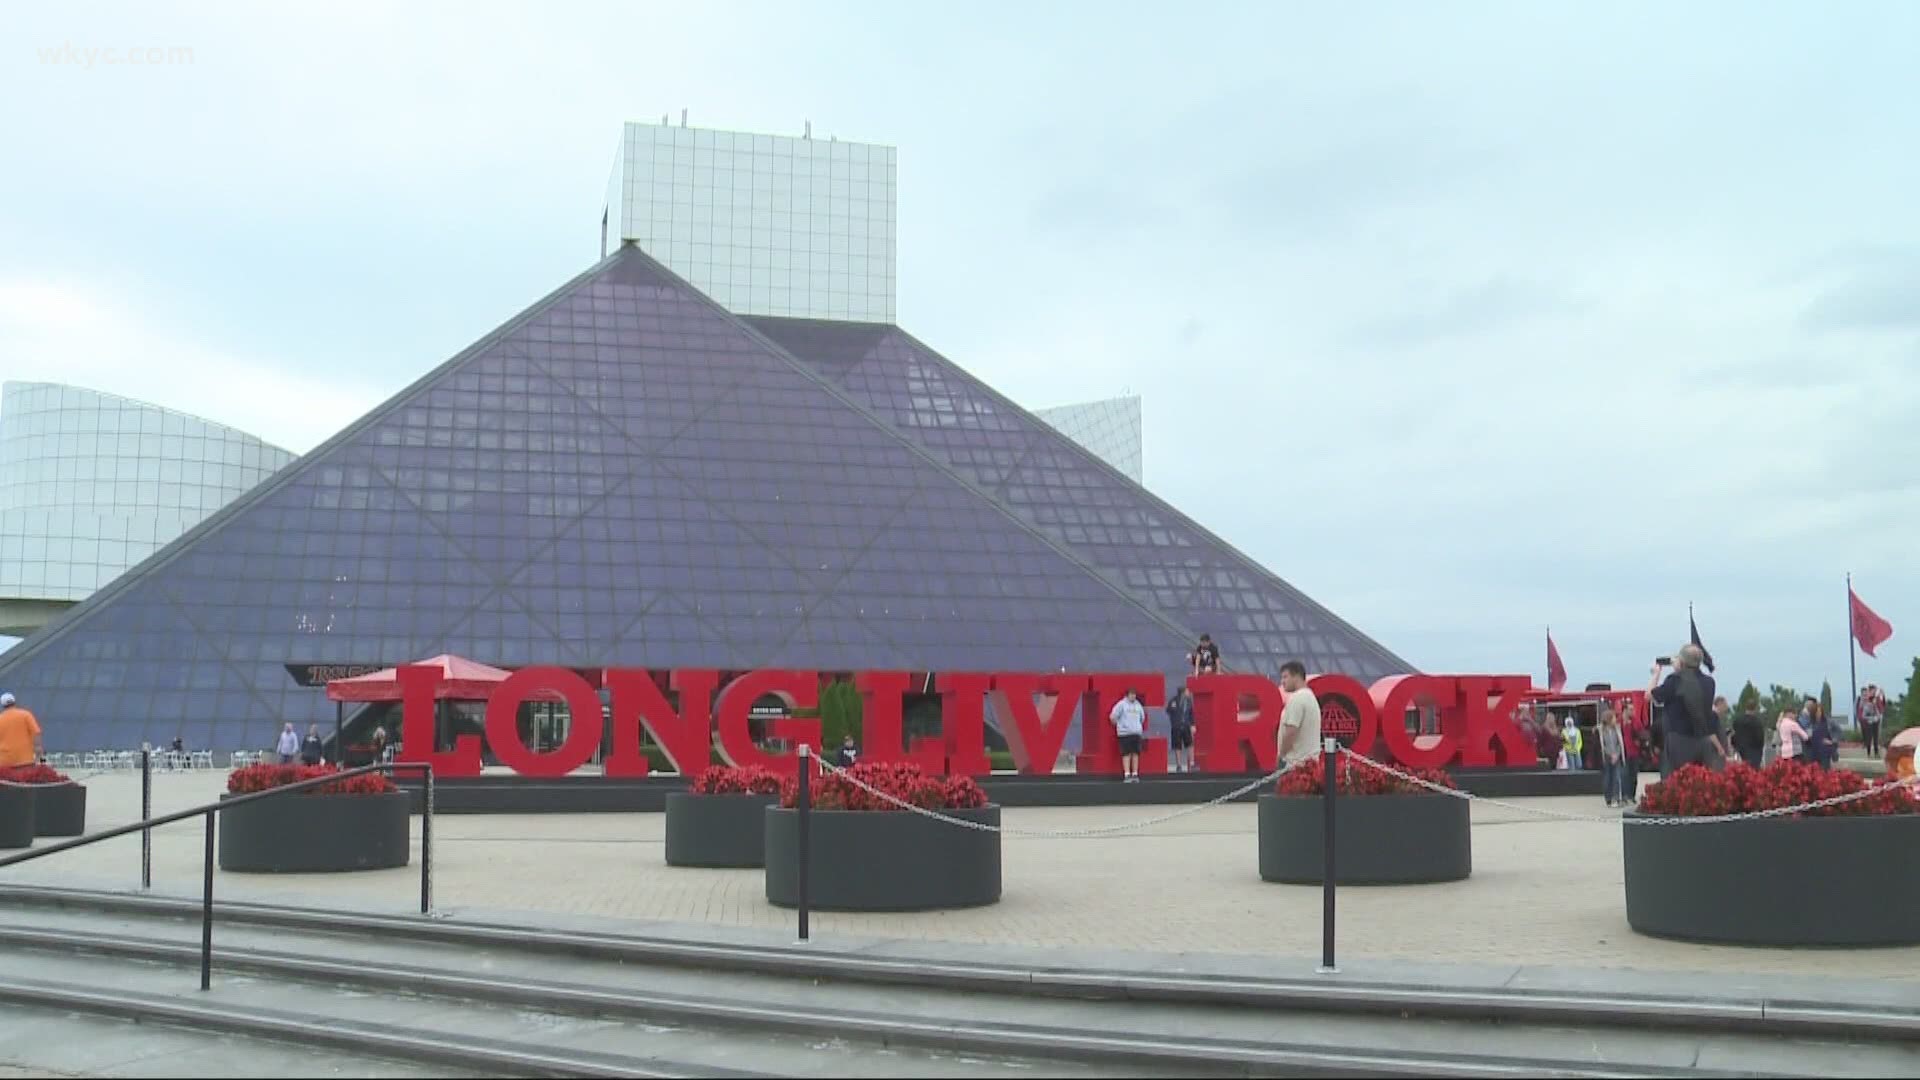 The Rock Hall will reopen to the public on Monday, June 15. The free admission day for healthcare workers and their families will be on June 14.